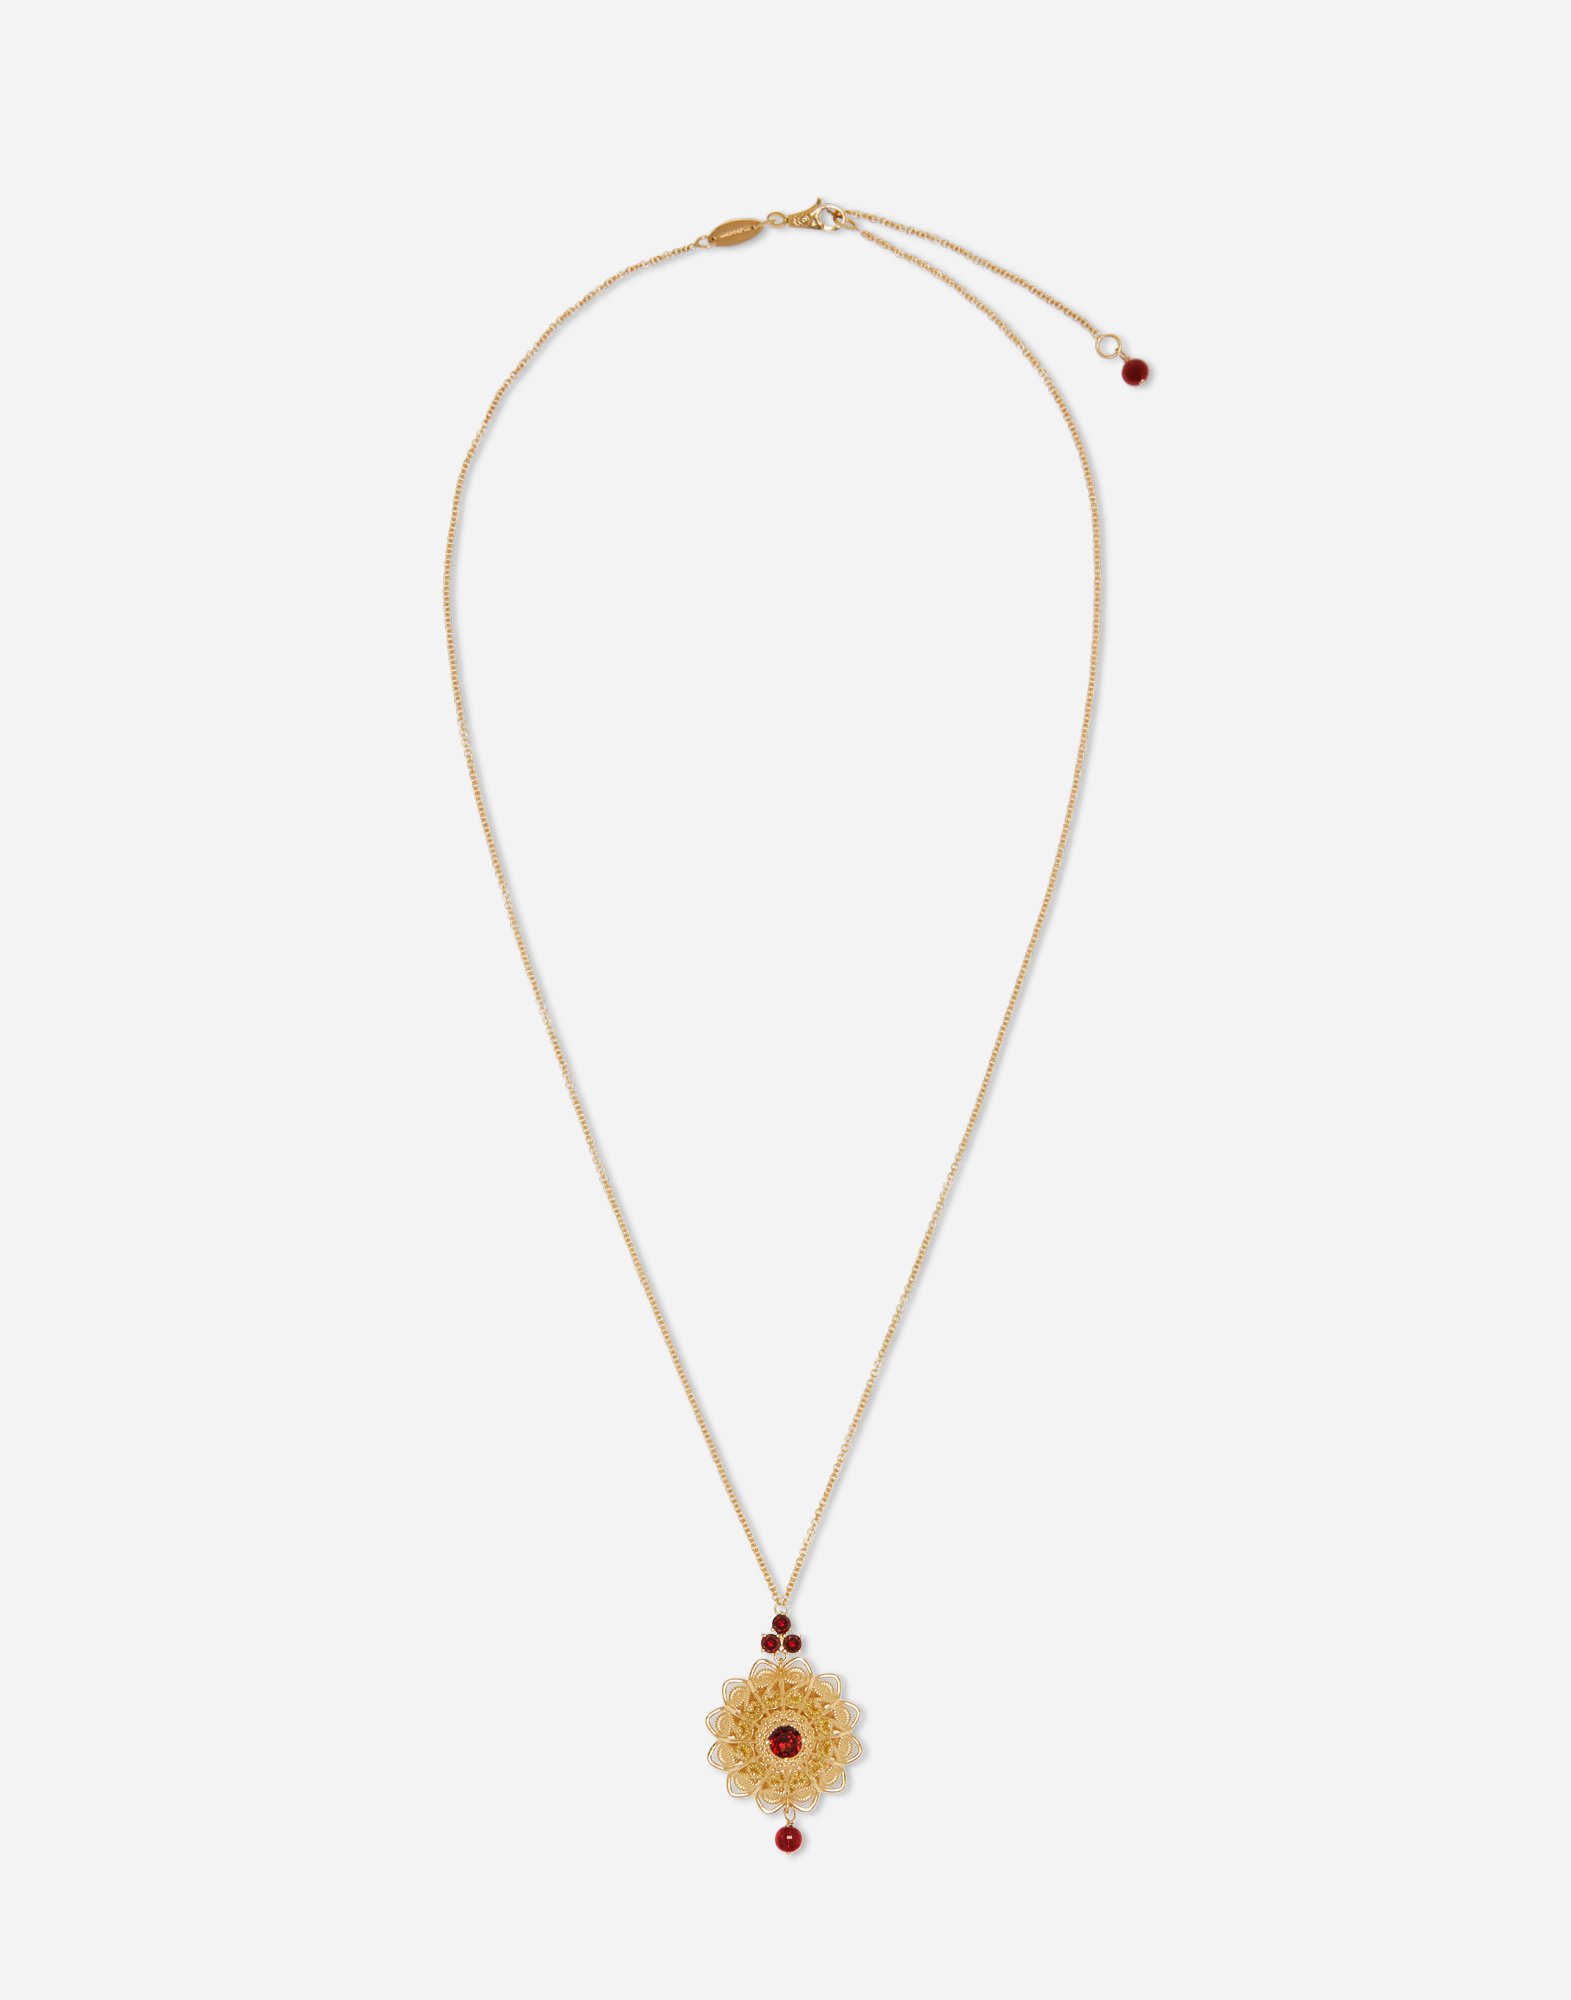 Dolce & Gabbana Pizzo Pendant In Yellow Gold And Rhodolite Garnets Gold Female Onesize